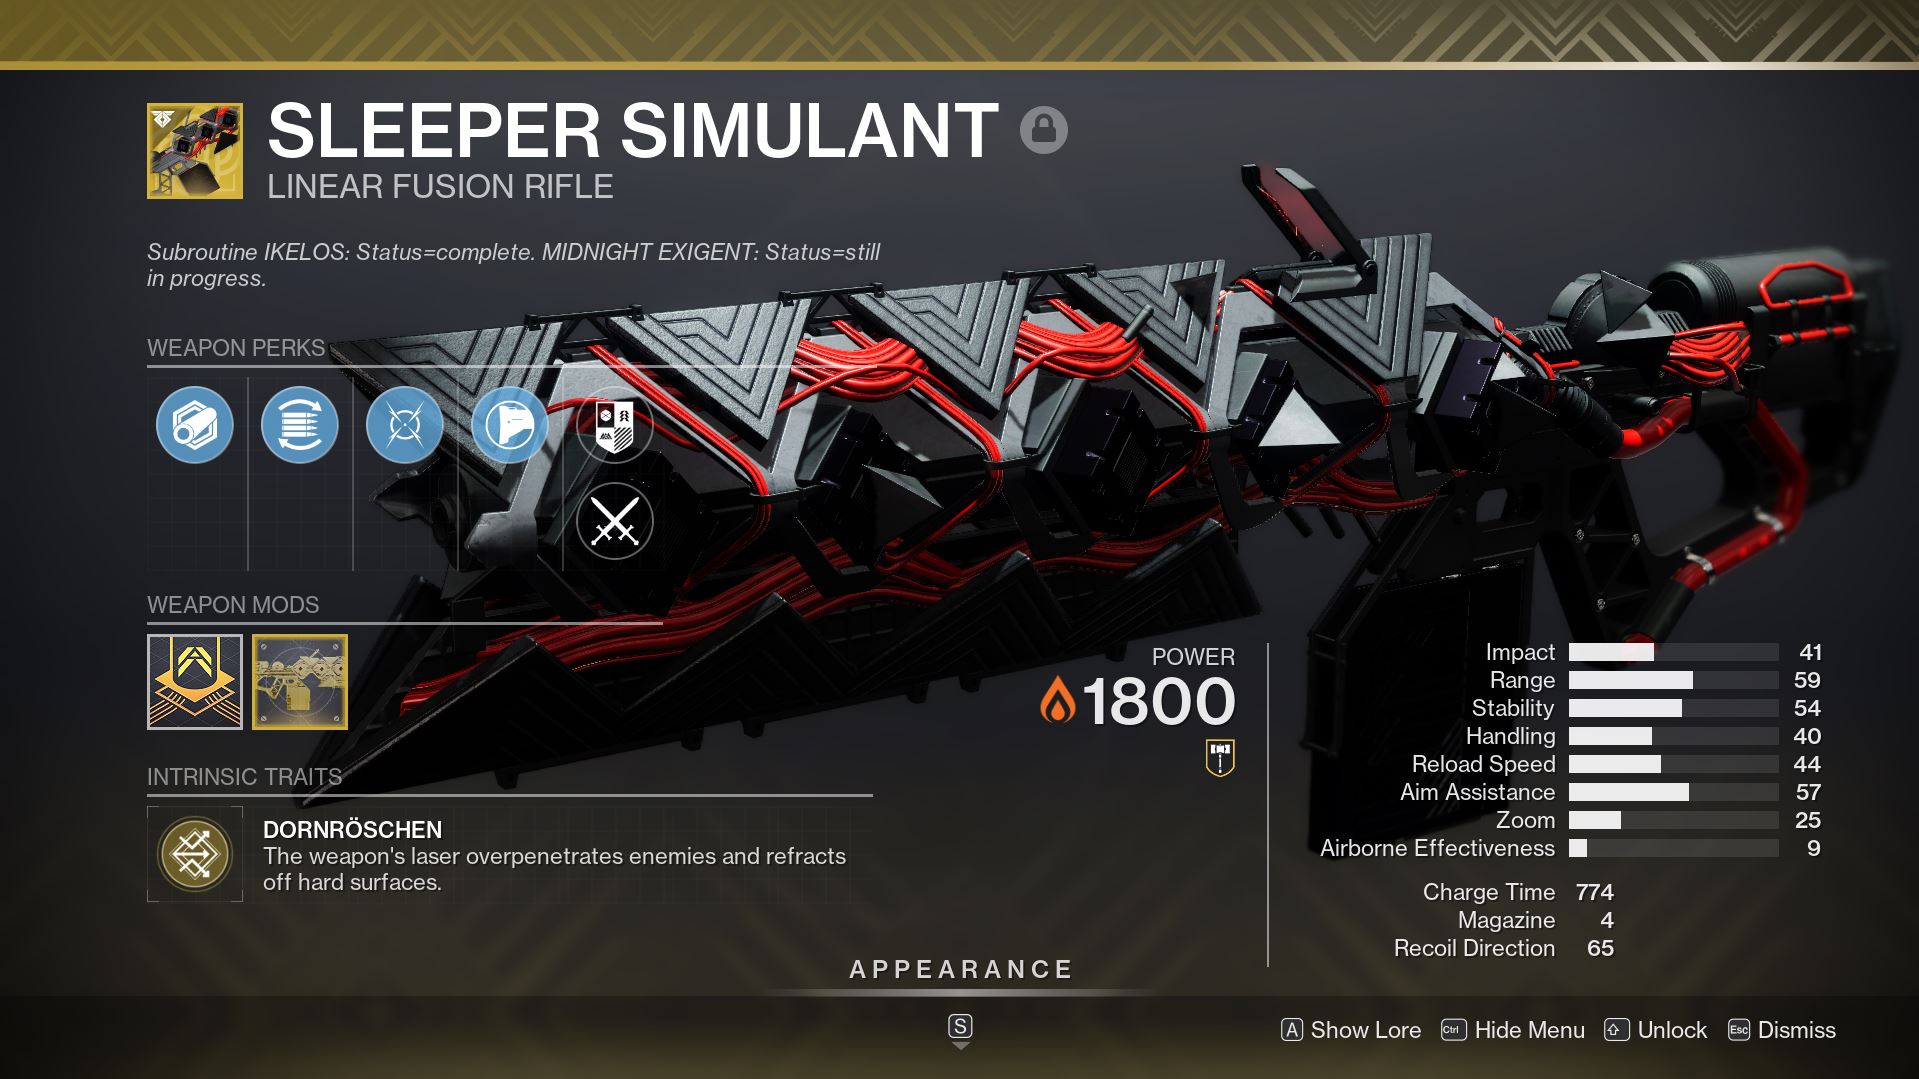 How To Complete The Illuminated Torment Challenge In Destiny 2 Root Of Nightmares Sleeper Simulant